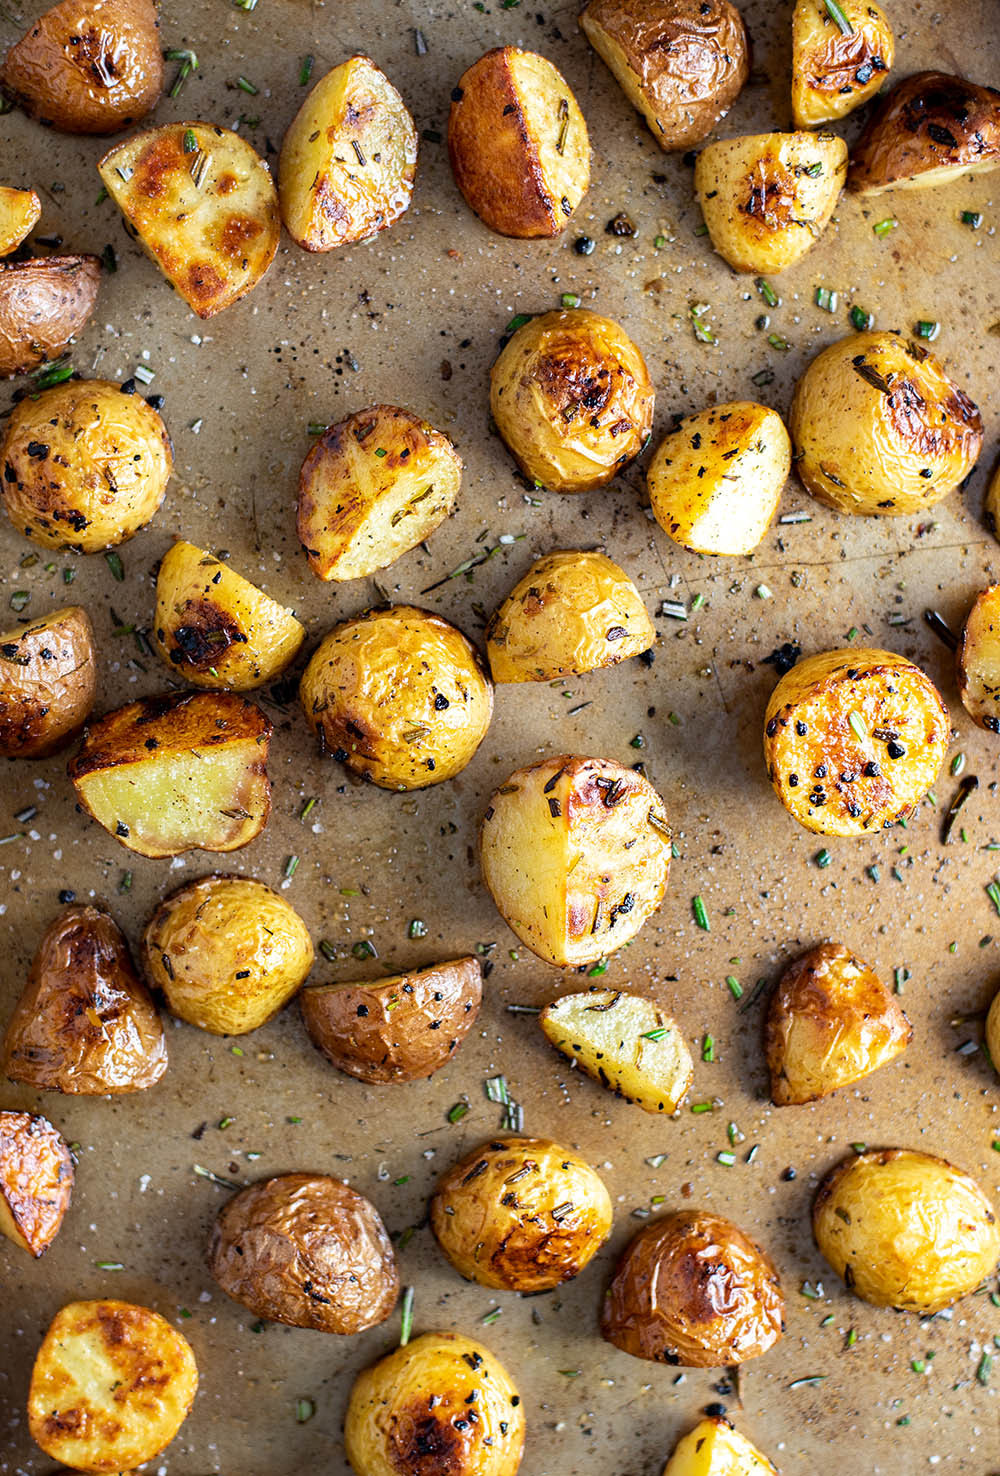 Roasted Baby Potatoes With Rosemary
 Roasted Baby Potatoes with Garlic Rosemary and Truffle